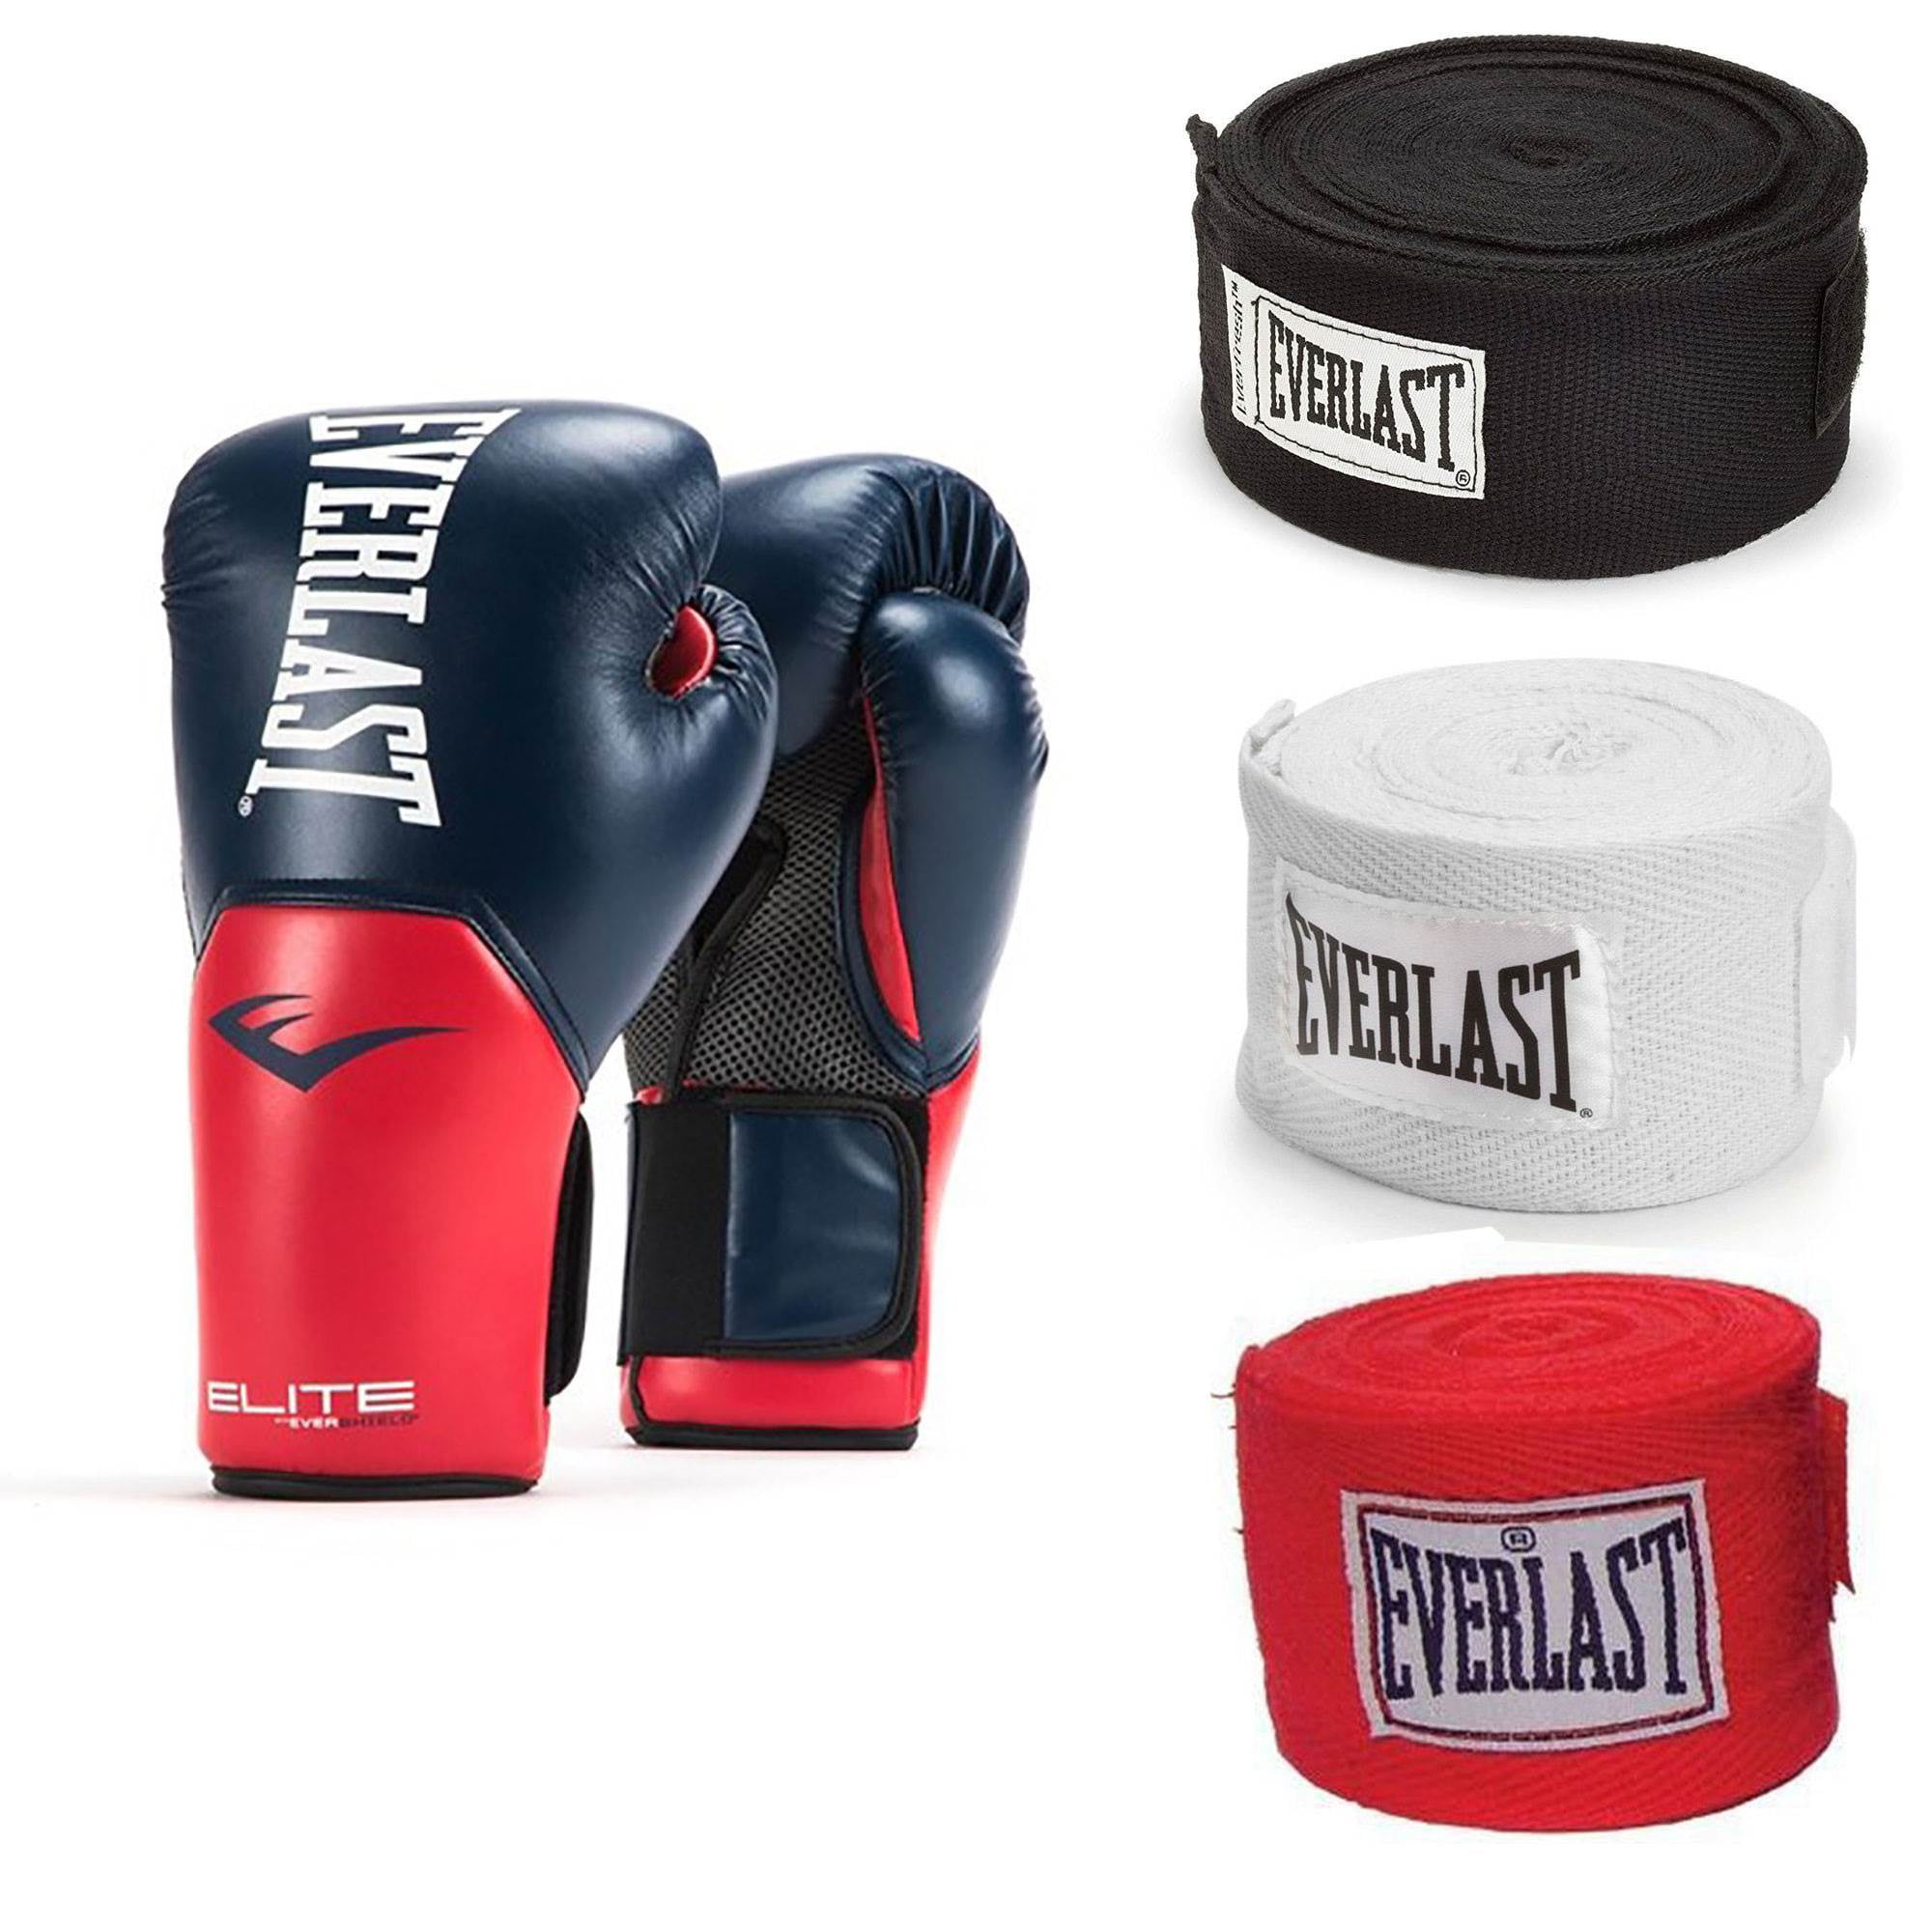 Free Ship Everlast Boxing Core Hand Wraps Black and Red Size S/M NEW 